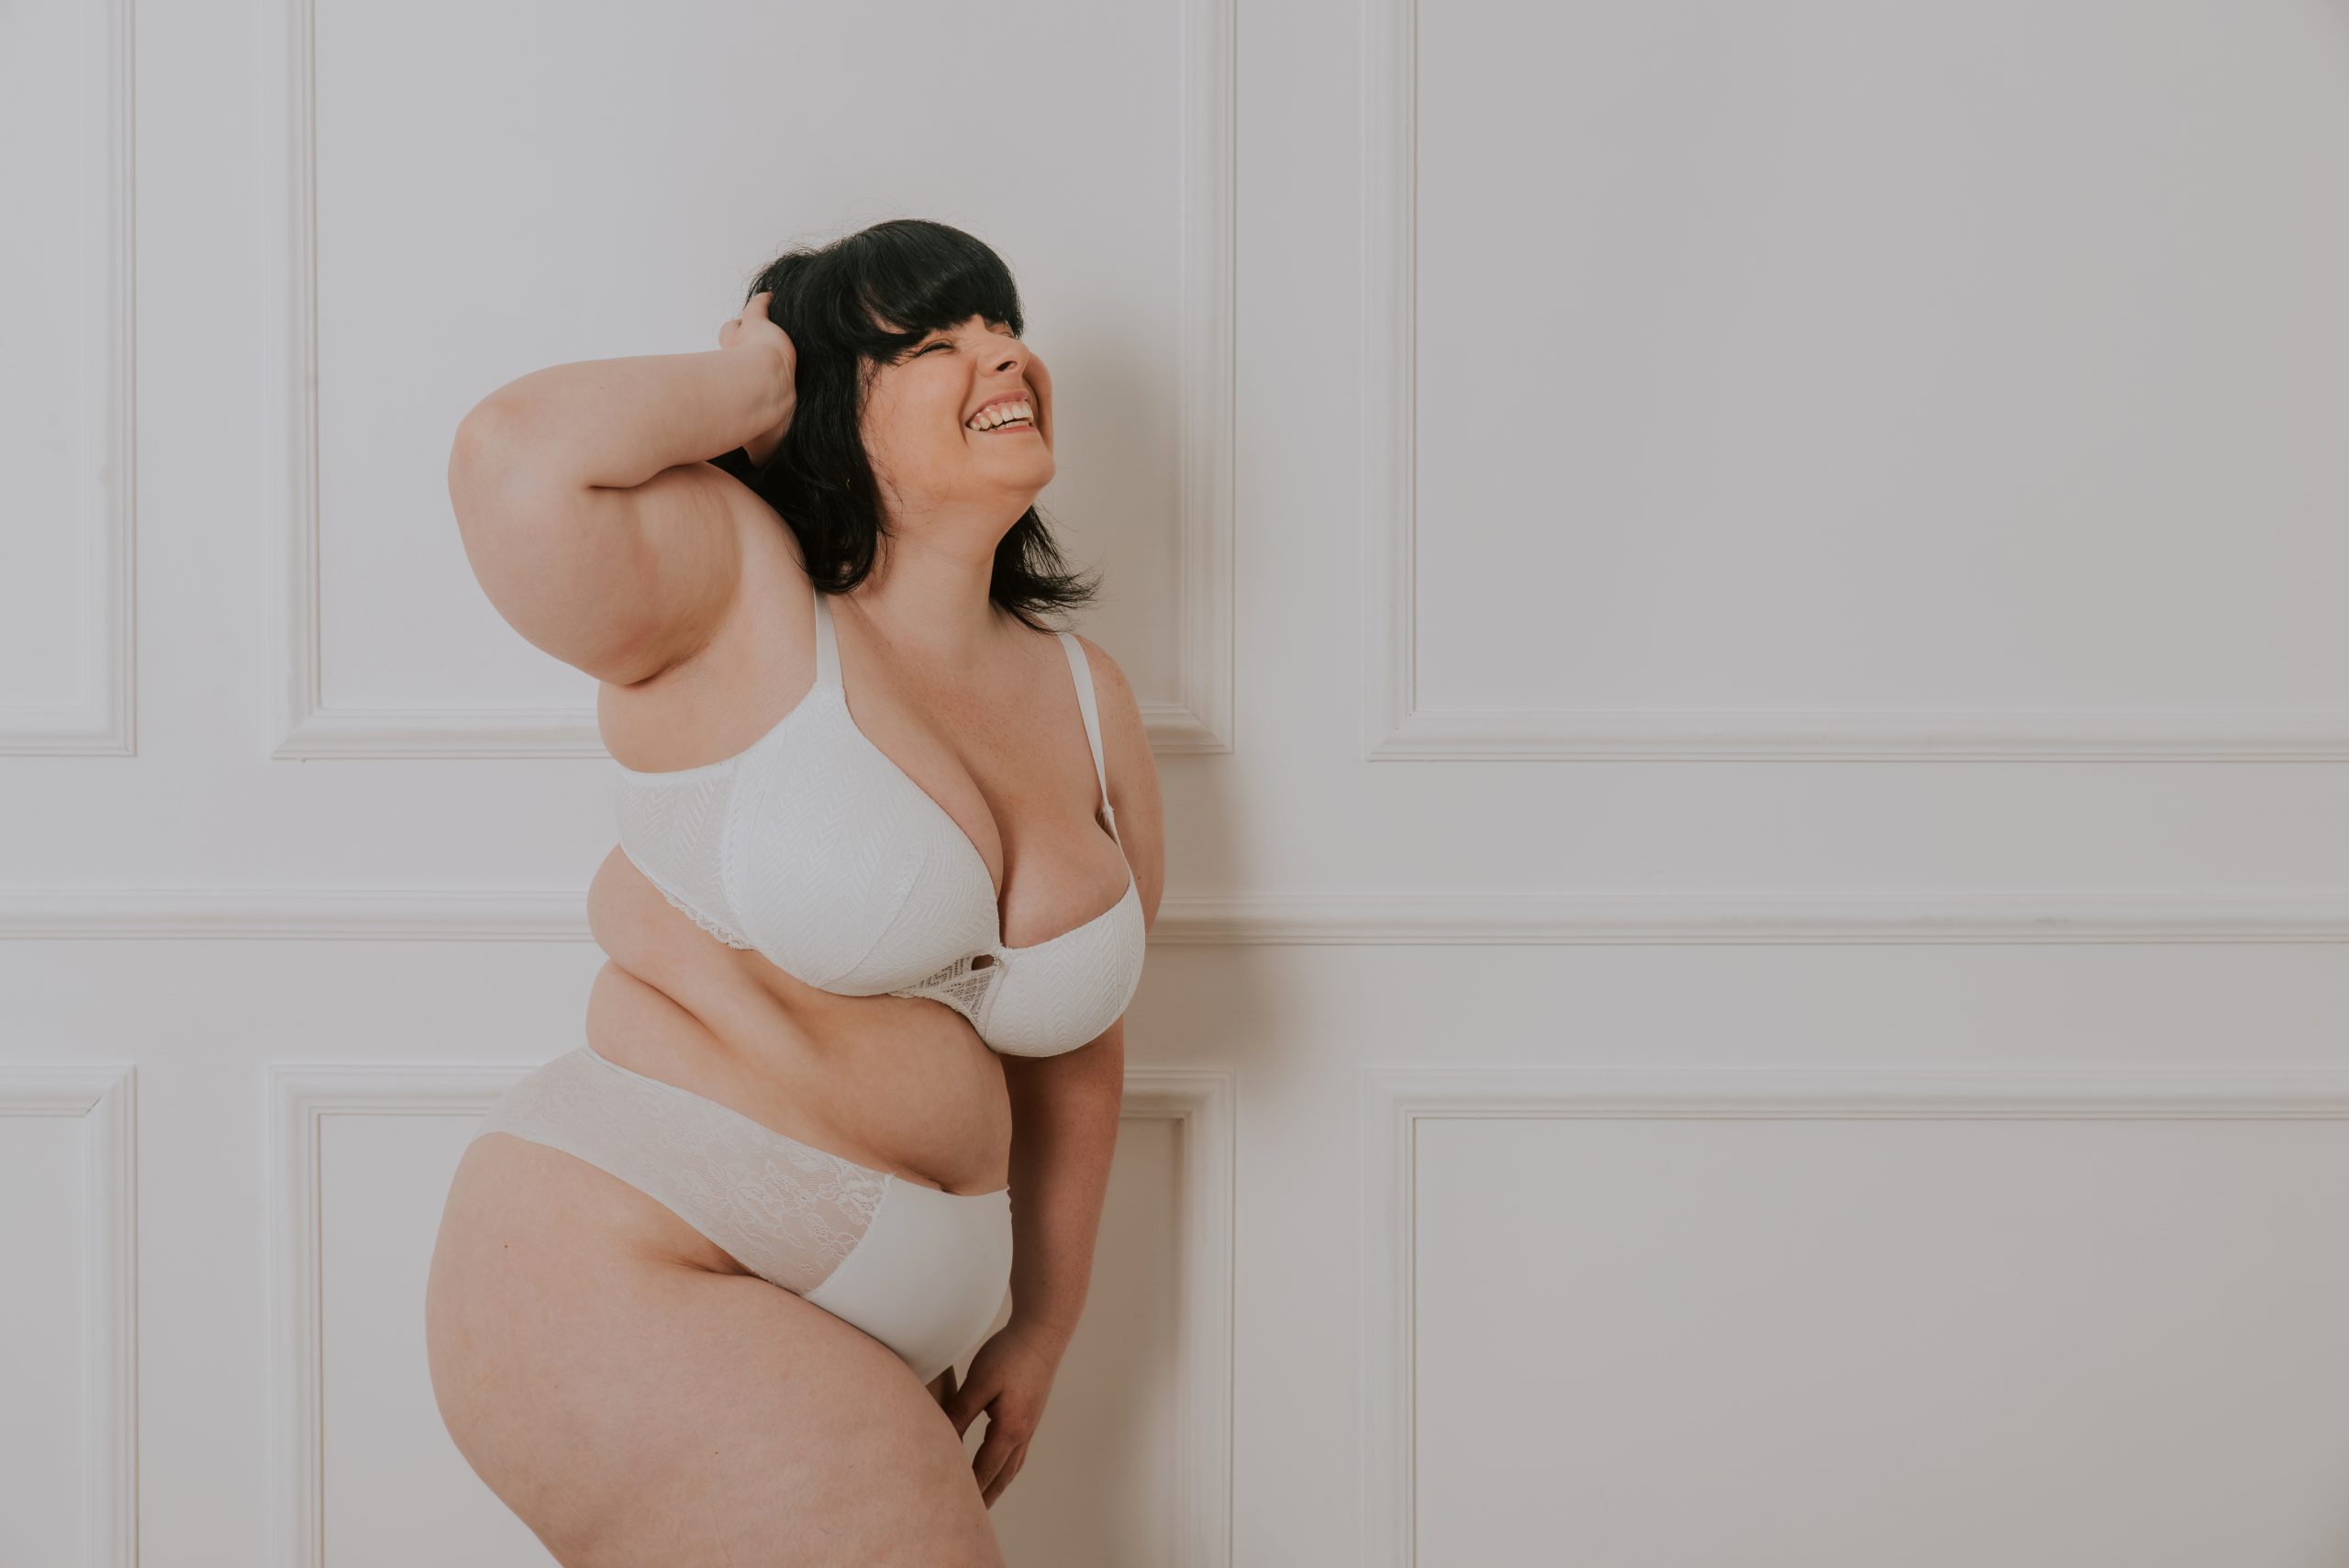 Plus size lingerie as a gift